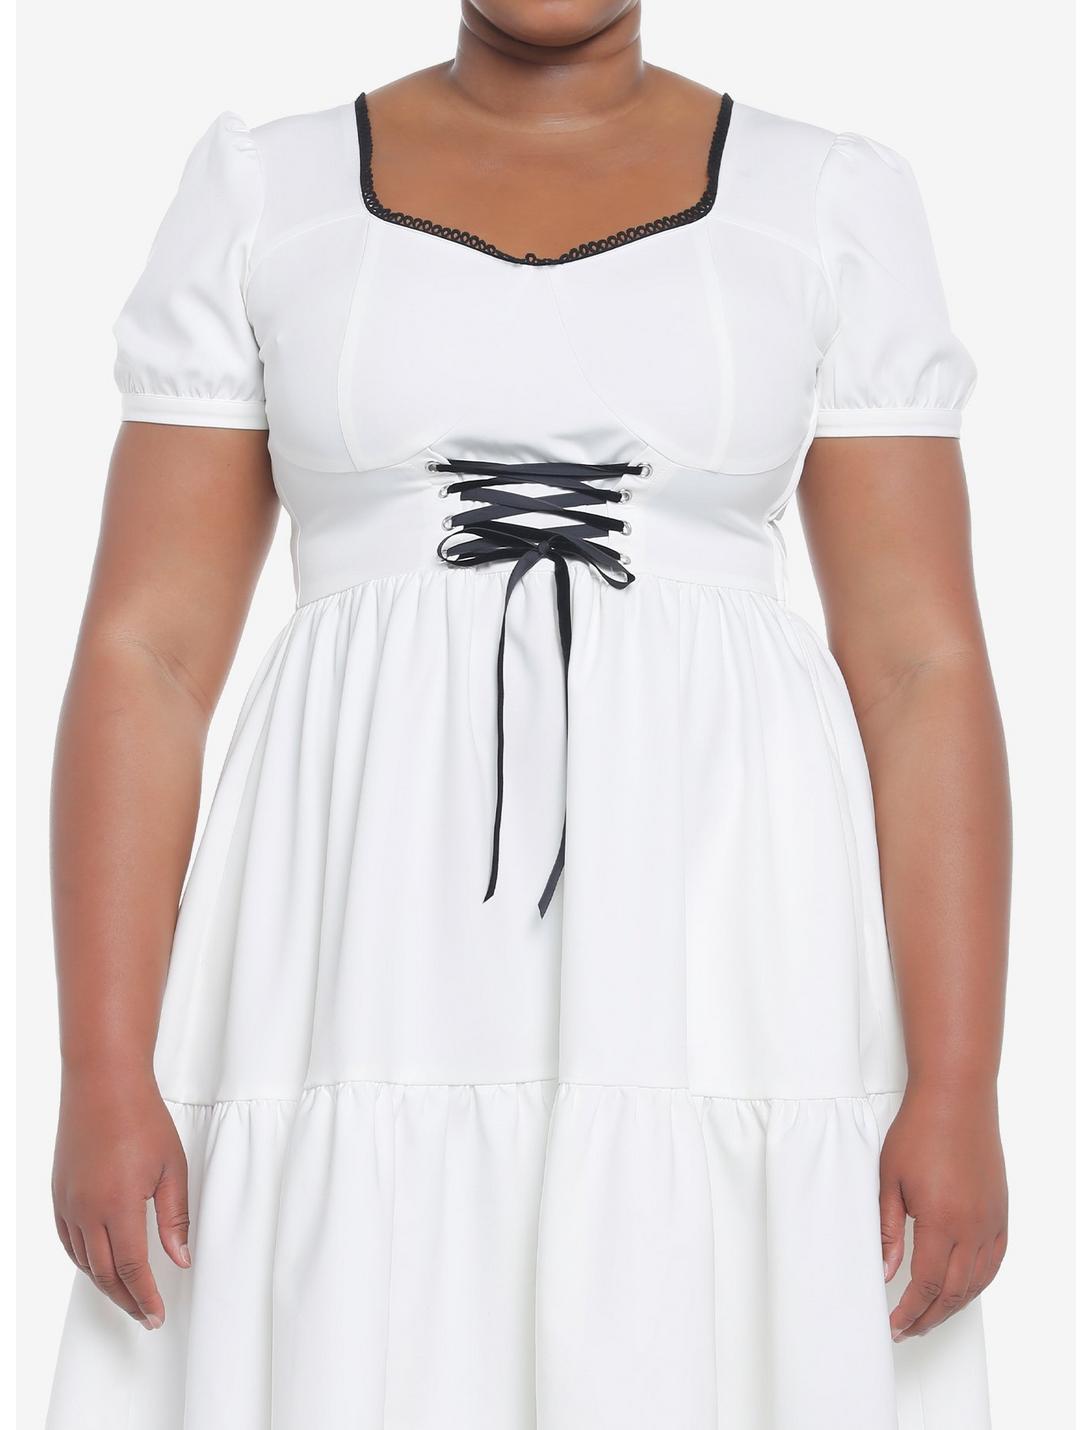 Ivory Corset Tiered Dress Plus Size, BRIGHT WHITE, hi-res